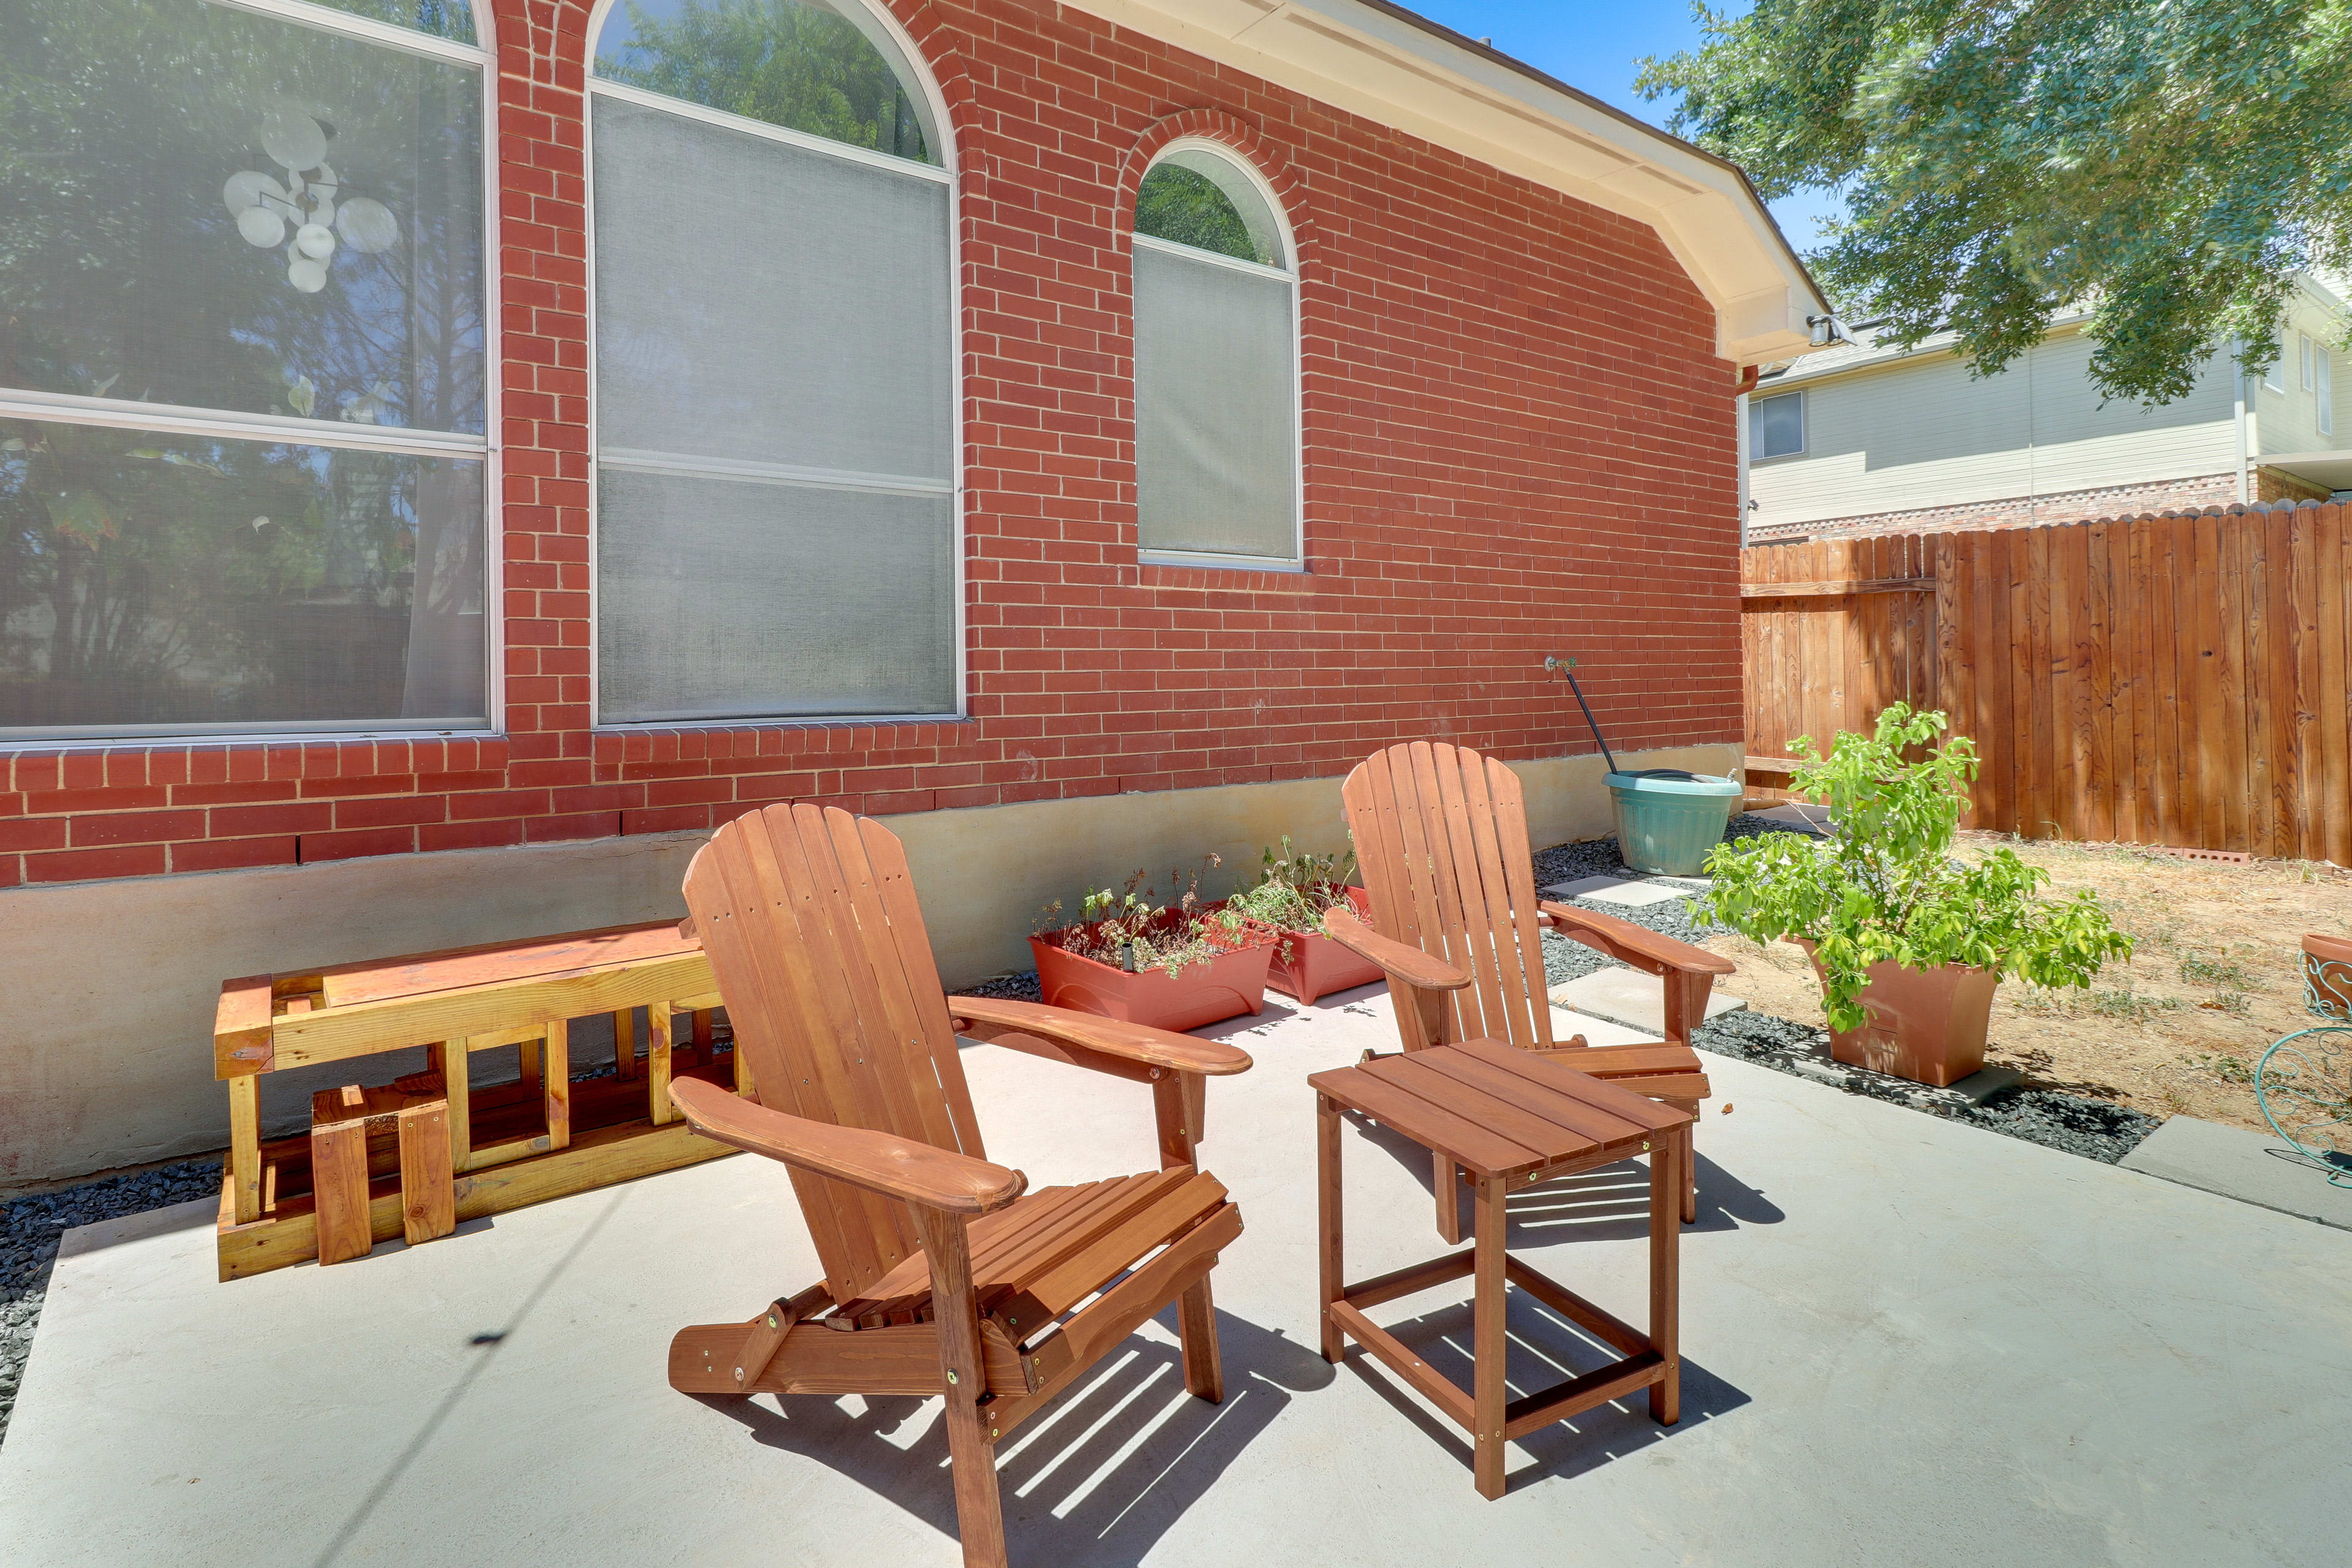 Private Furnished Patio